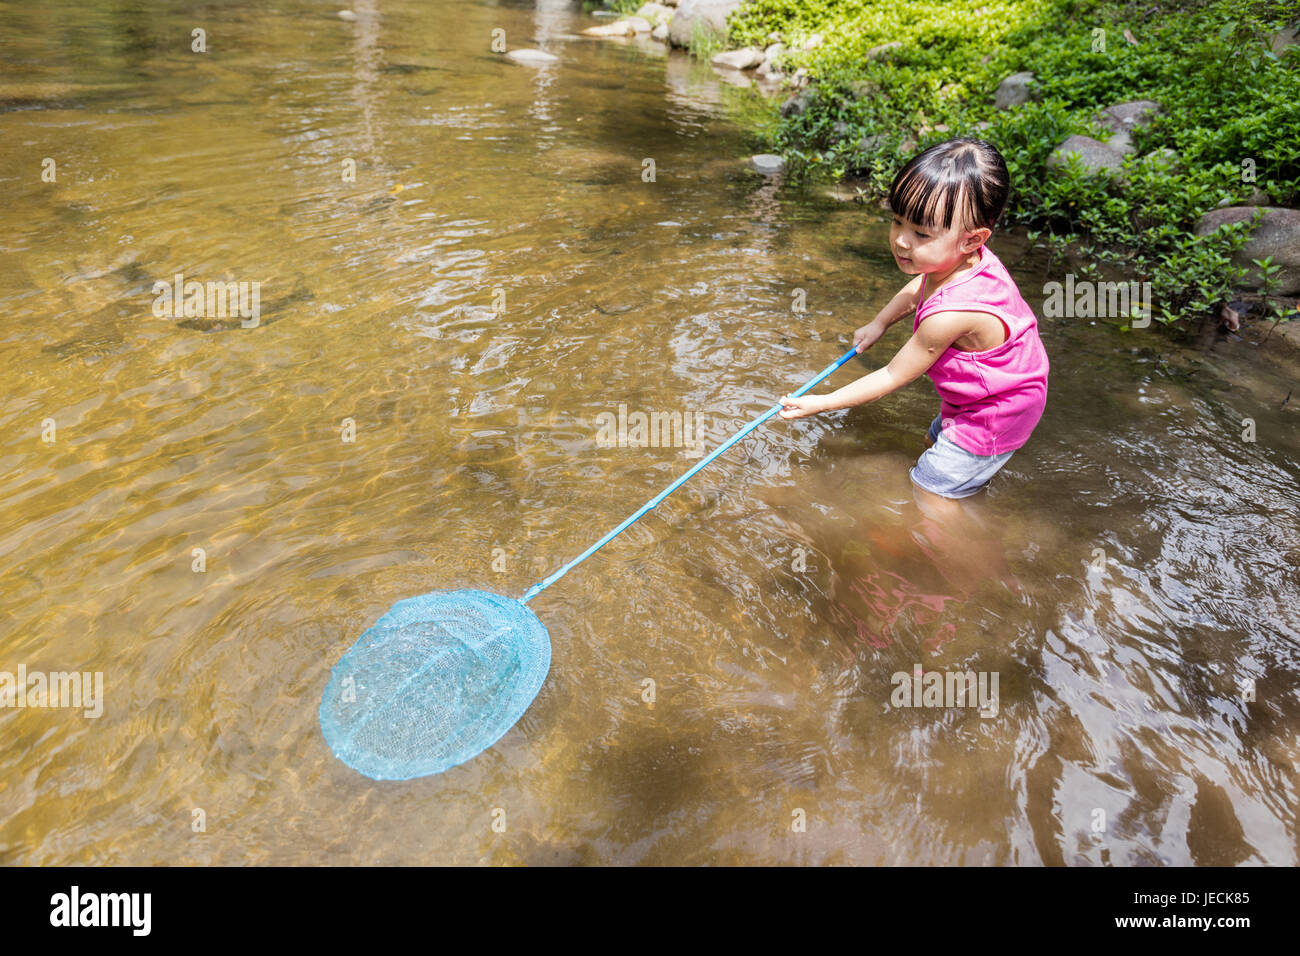 https://c8.alamy.com/comp/JECK85/asian-chinese-little-girl-catching-fish-with-fishing-net-in-the-creek-JECK85.jpg